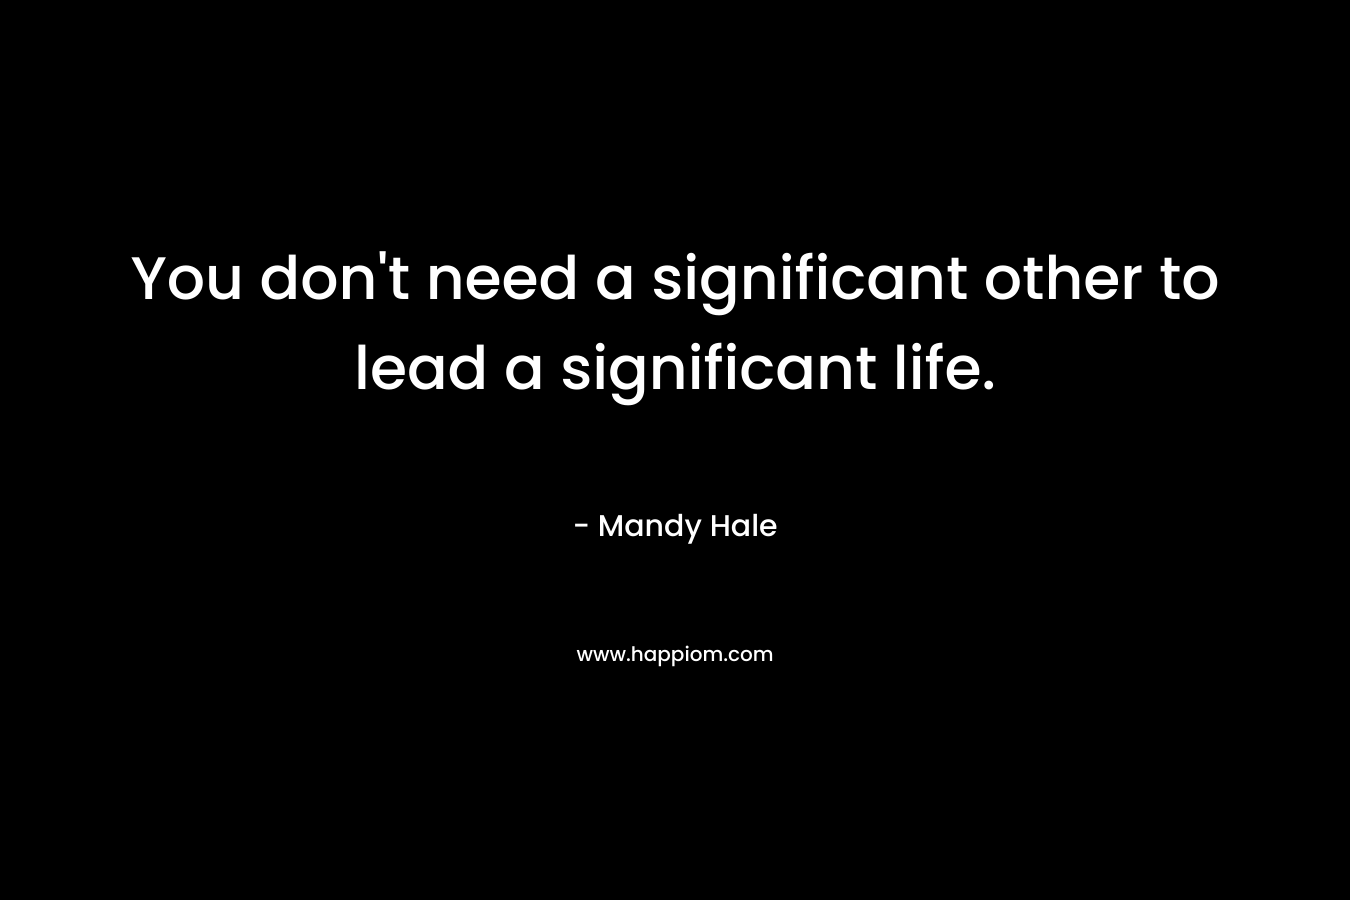 You don't need a significant other to lead a significant life.